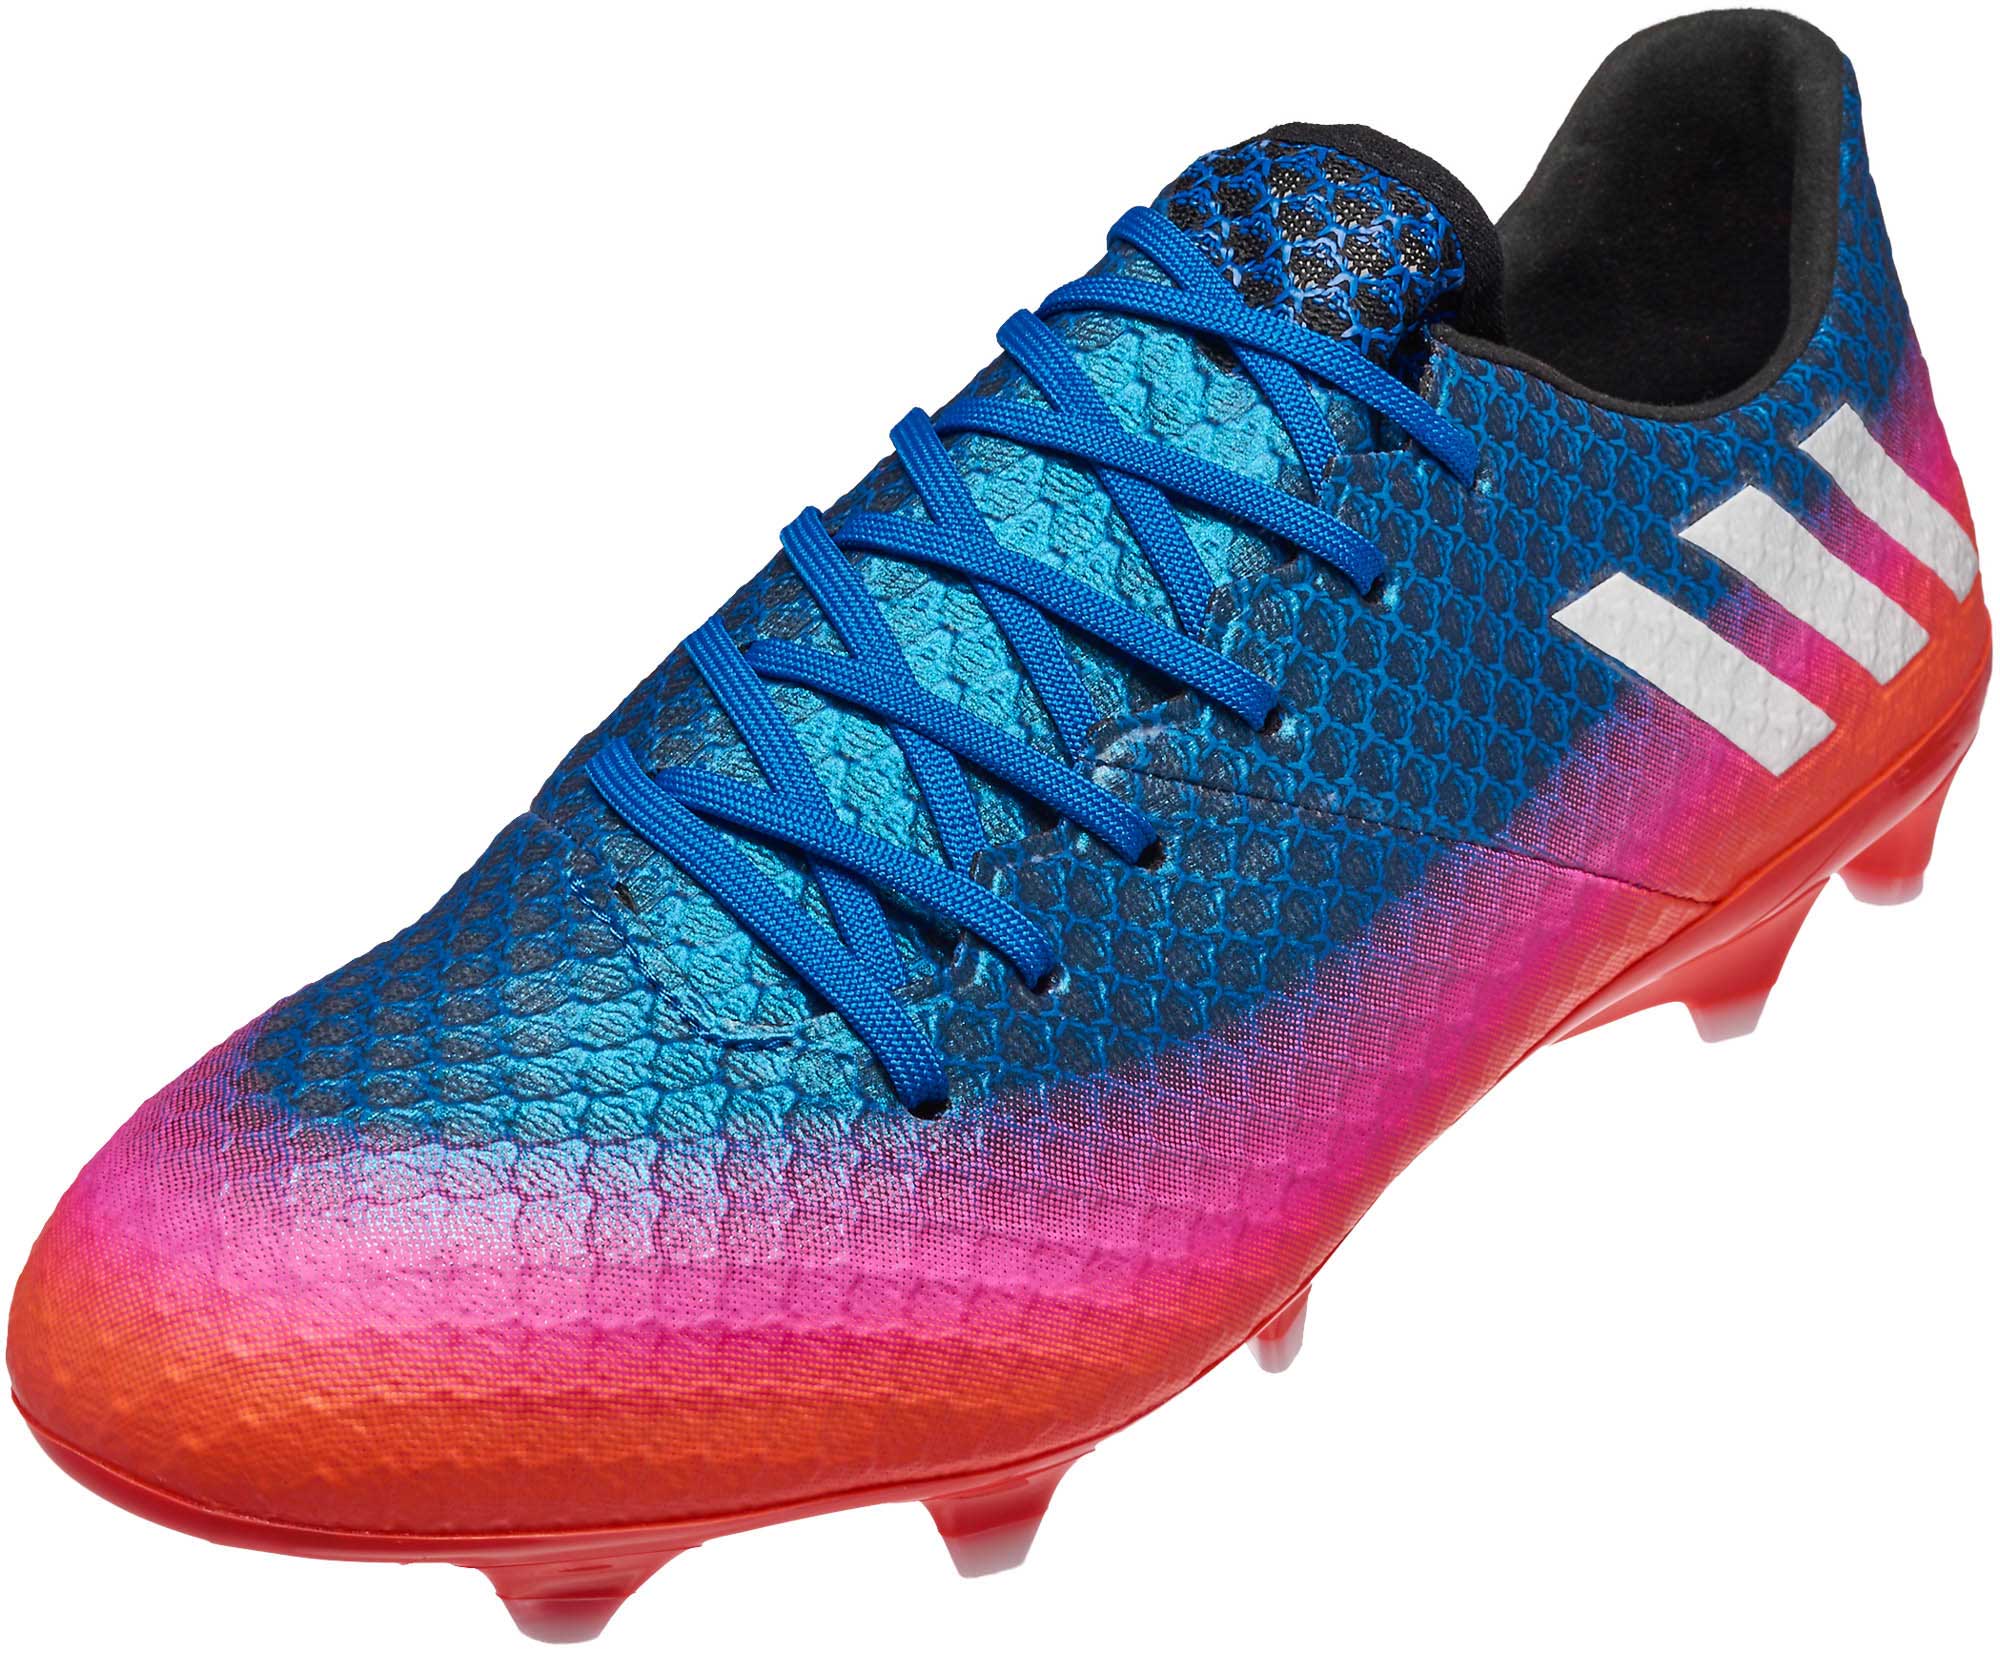 messi cleats pink